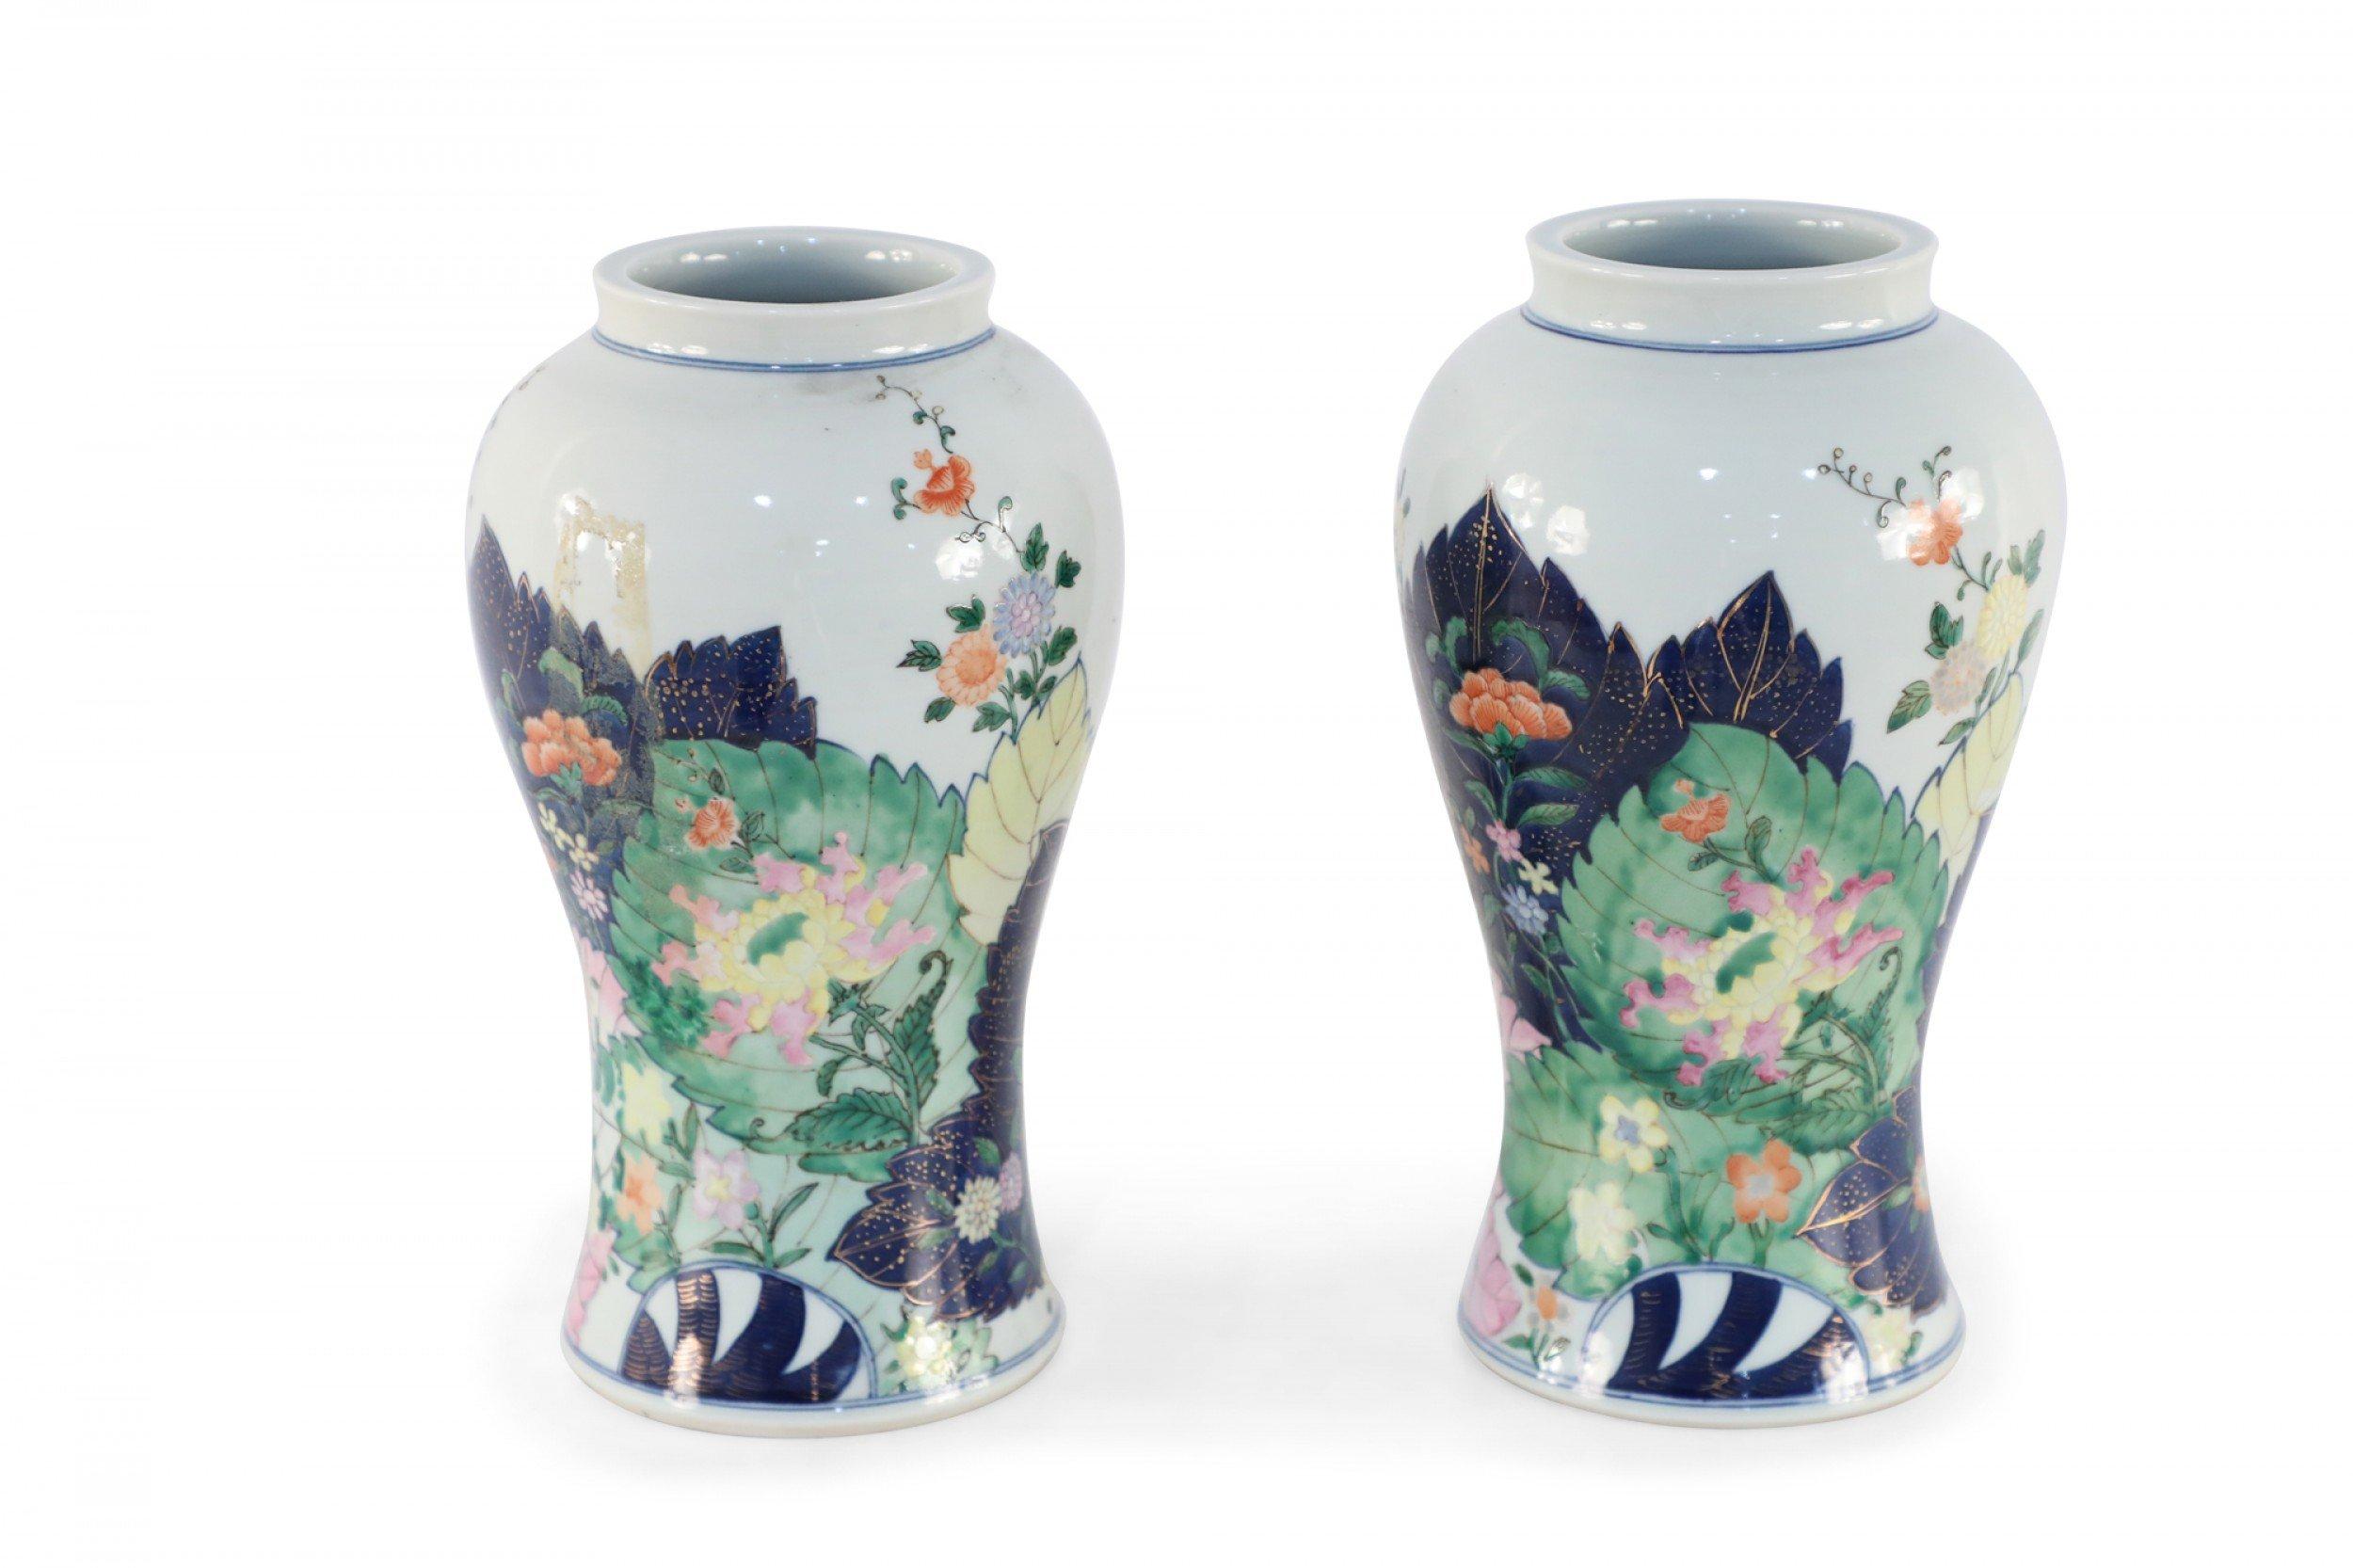 20th Century Pair of Chinese White Peacock and Floral Design Urn-Shaped Porcelain Vases For Sale